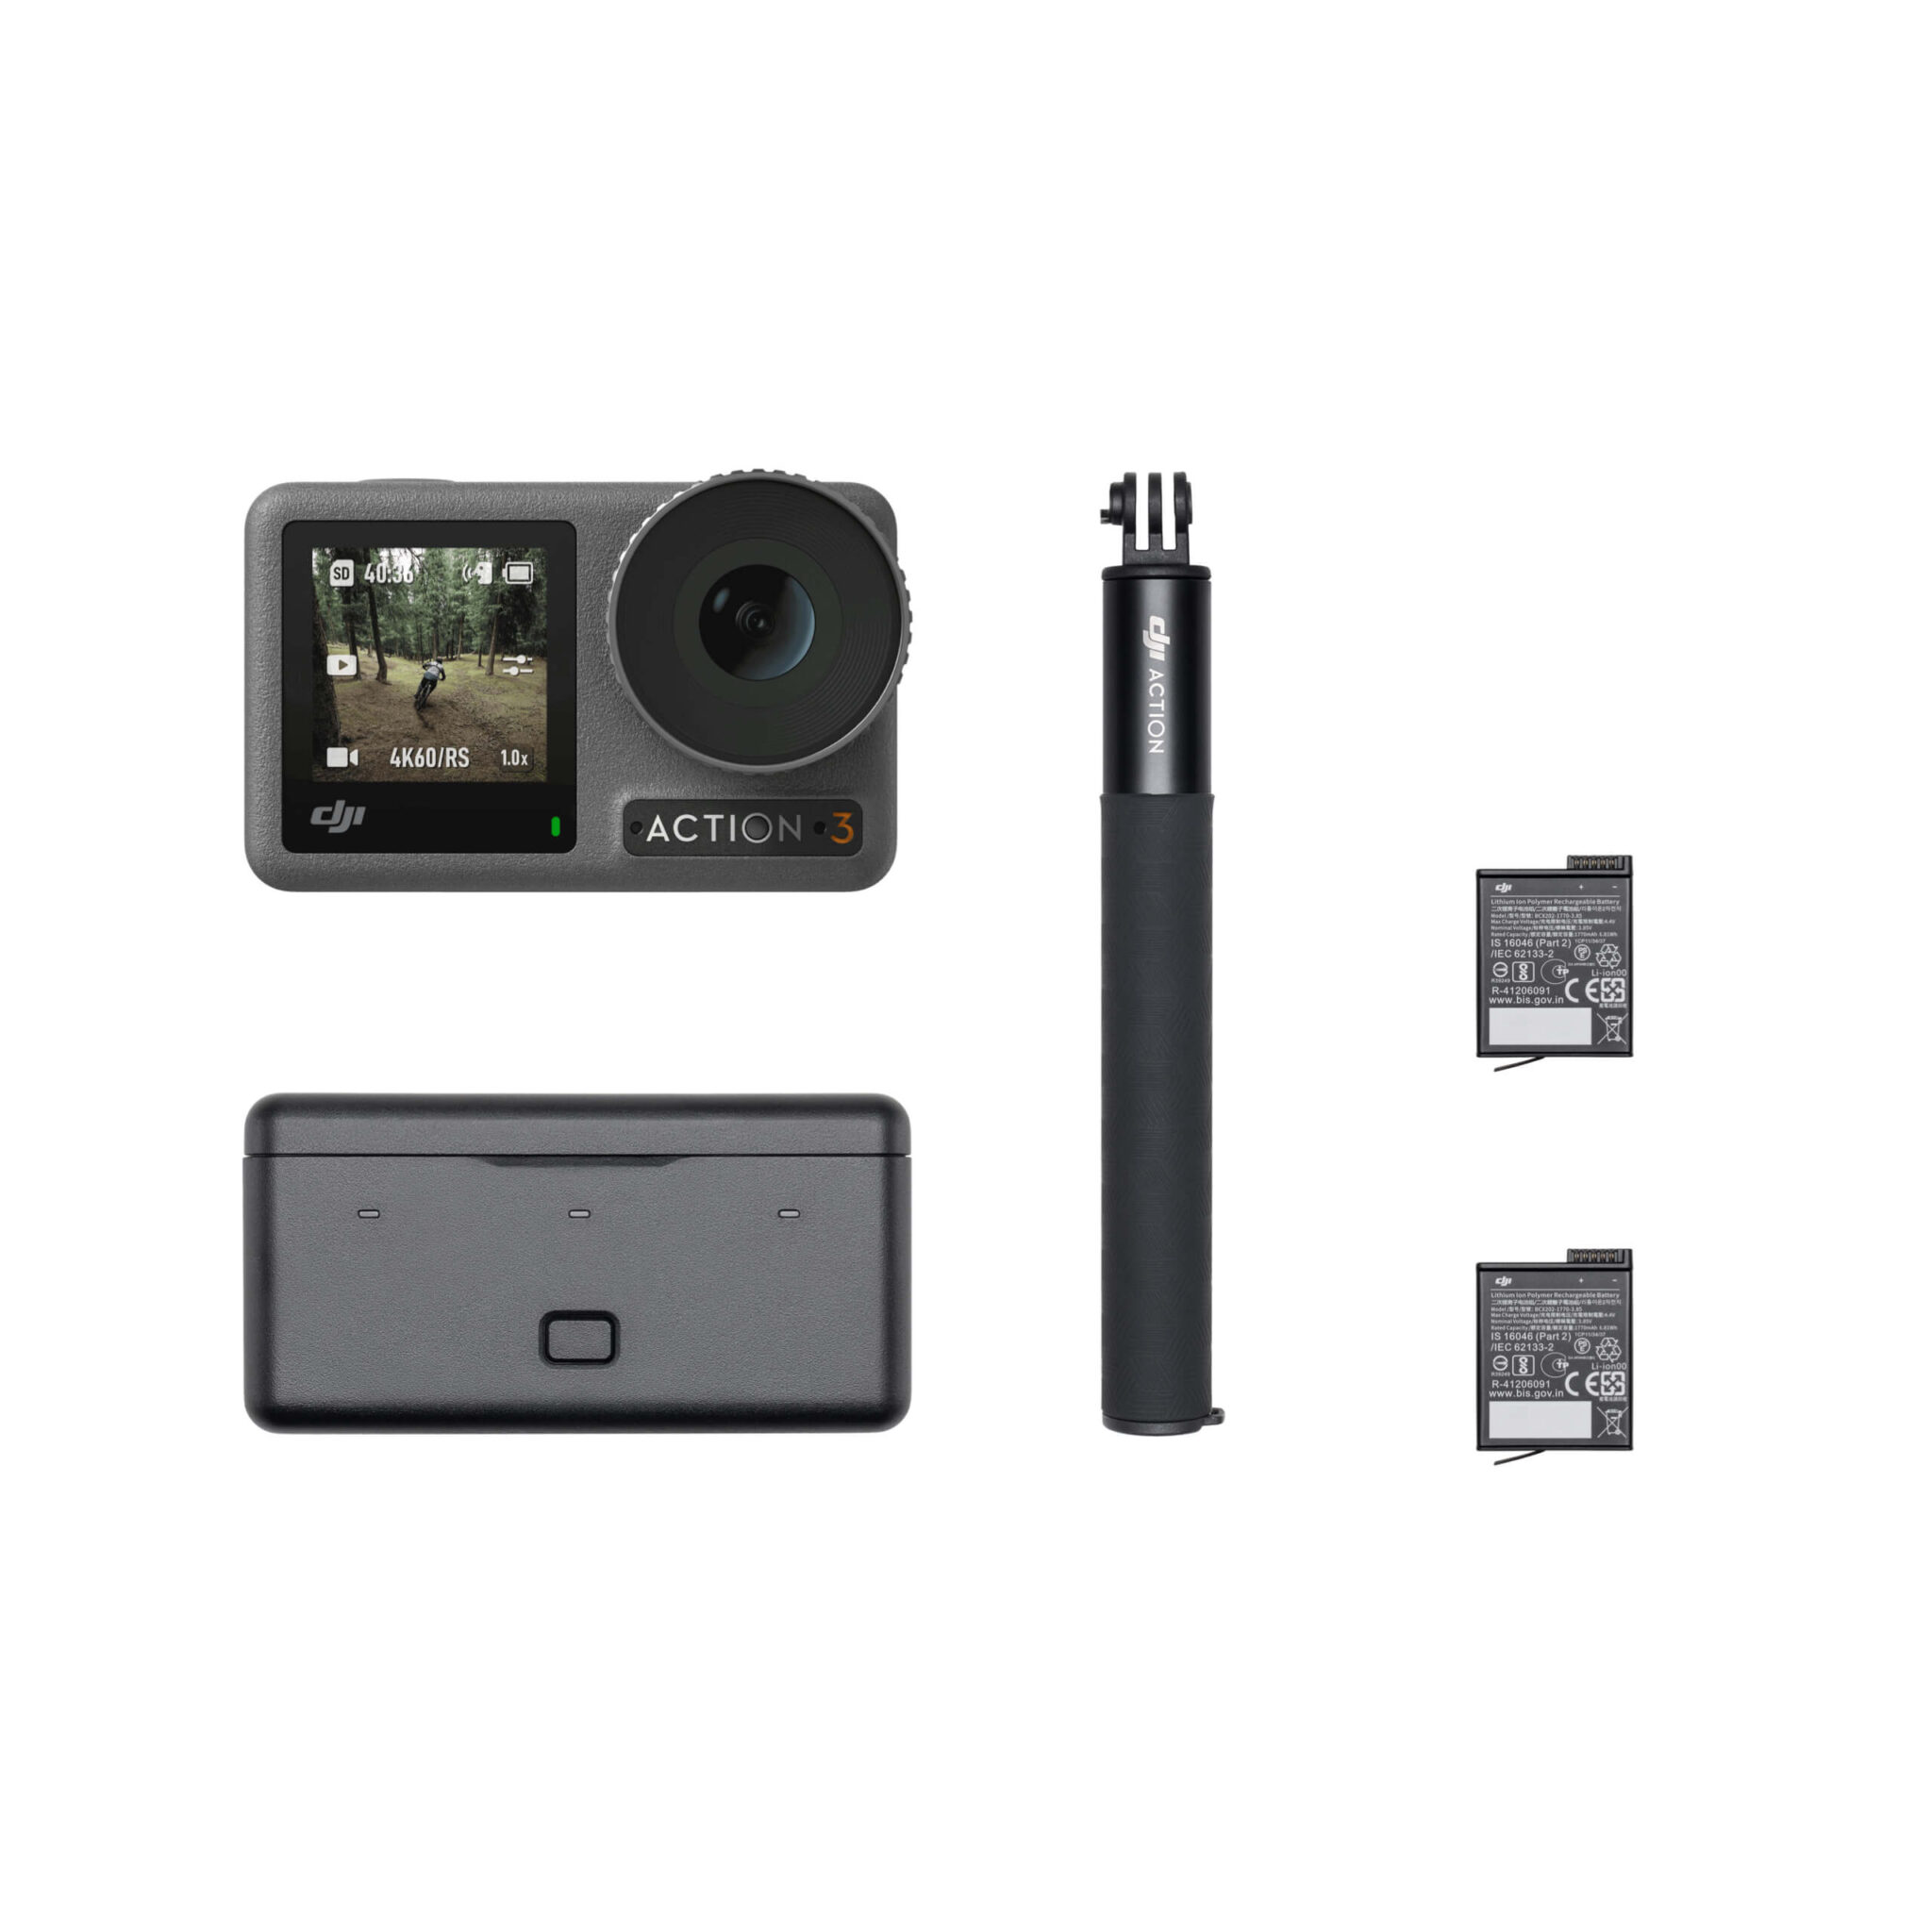 DJI Osmo Action 4 Standard Combo with Free Sandisk Extreme MicroSD 64G